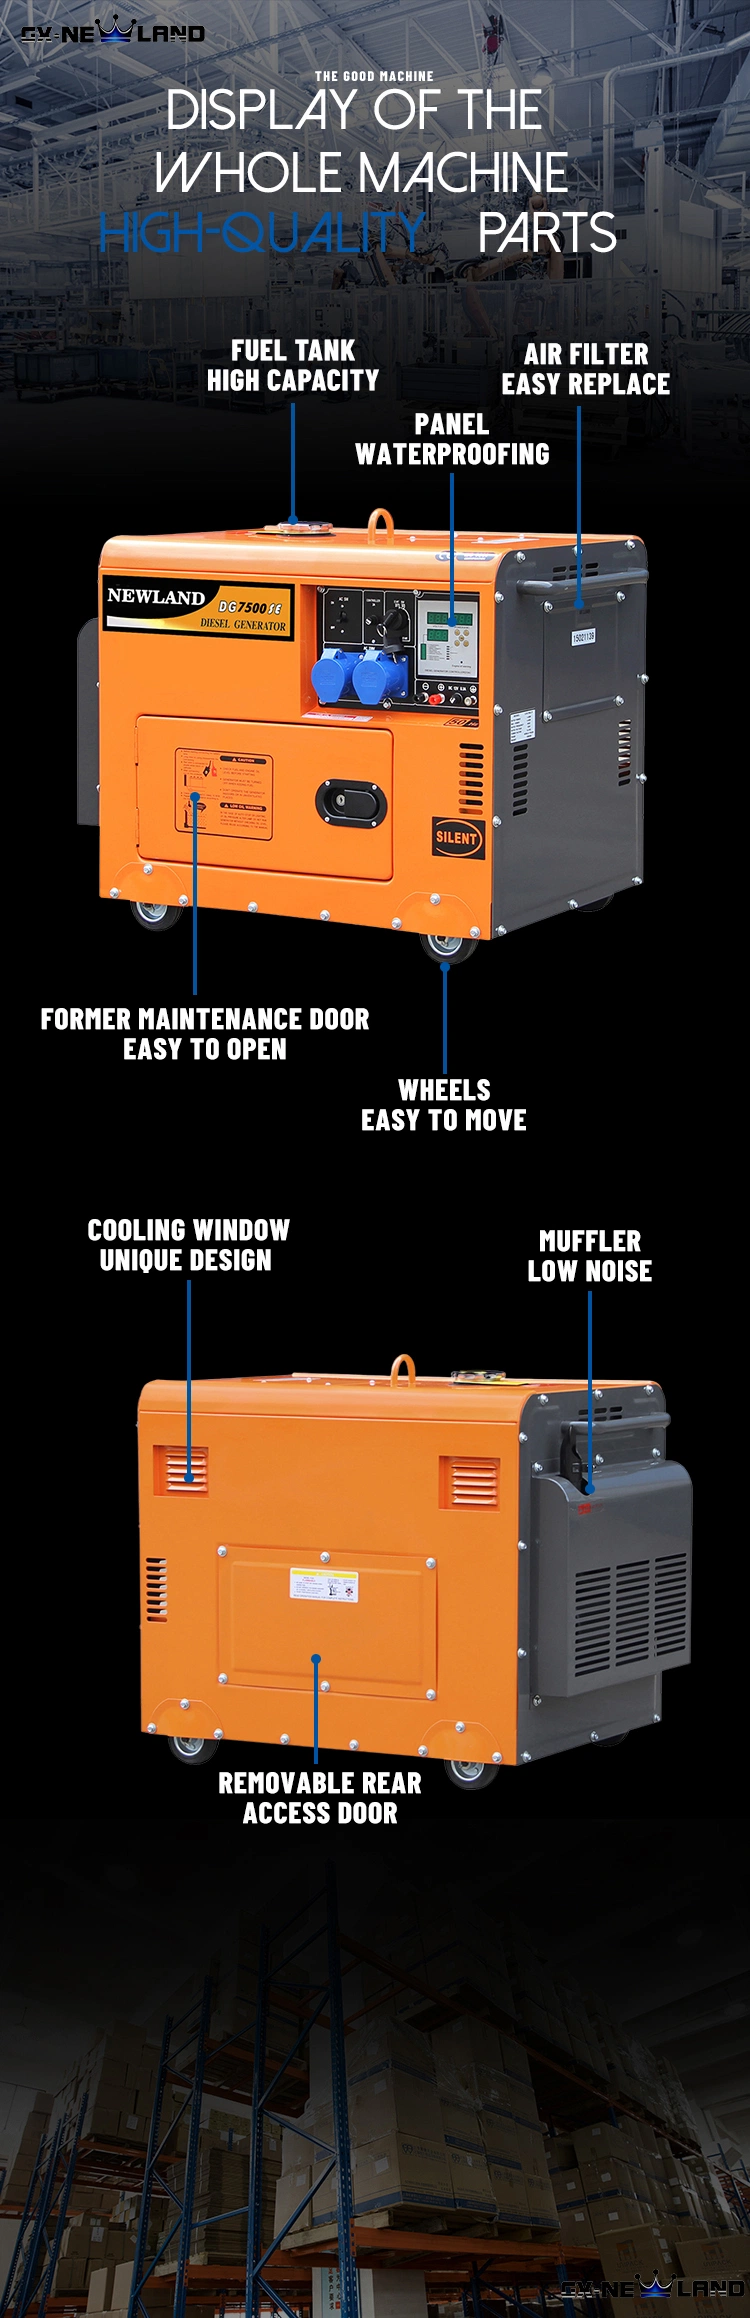 Newland 5.5kw Silent Diesel Generator with Low Fuel Consumption Per Hour